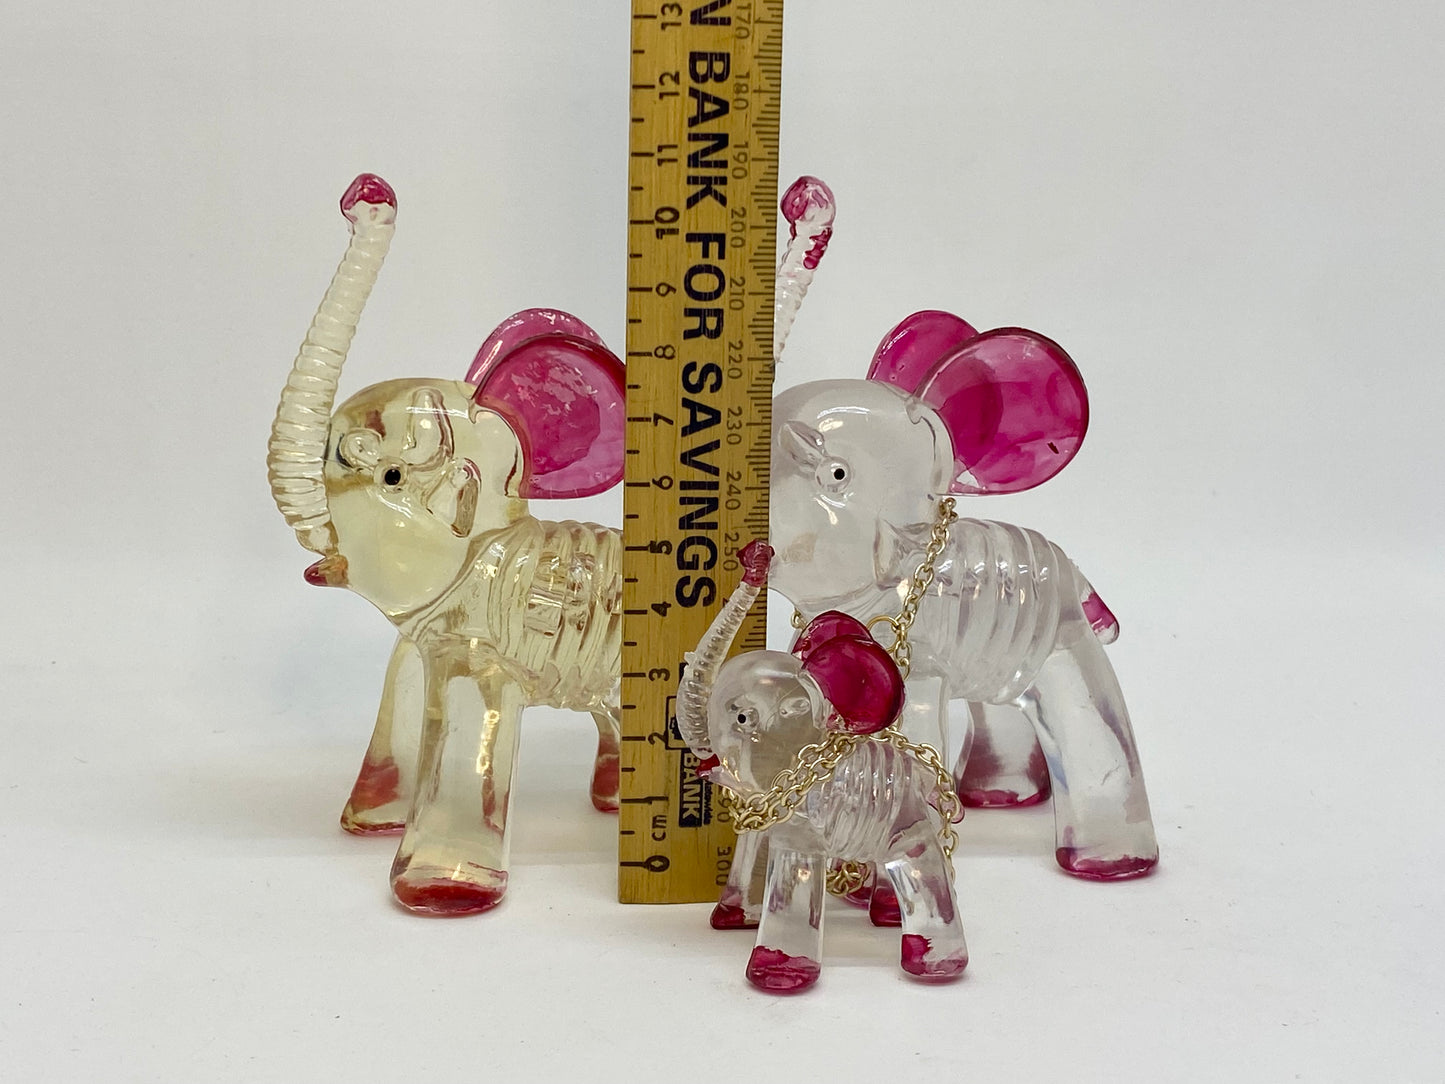 Vintage Lucite Elephants (3) made in Hong Kong